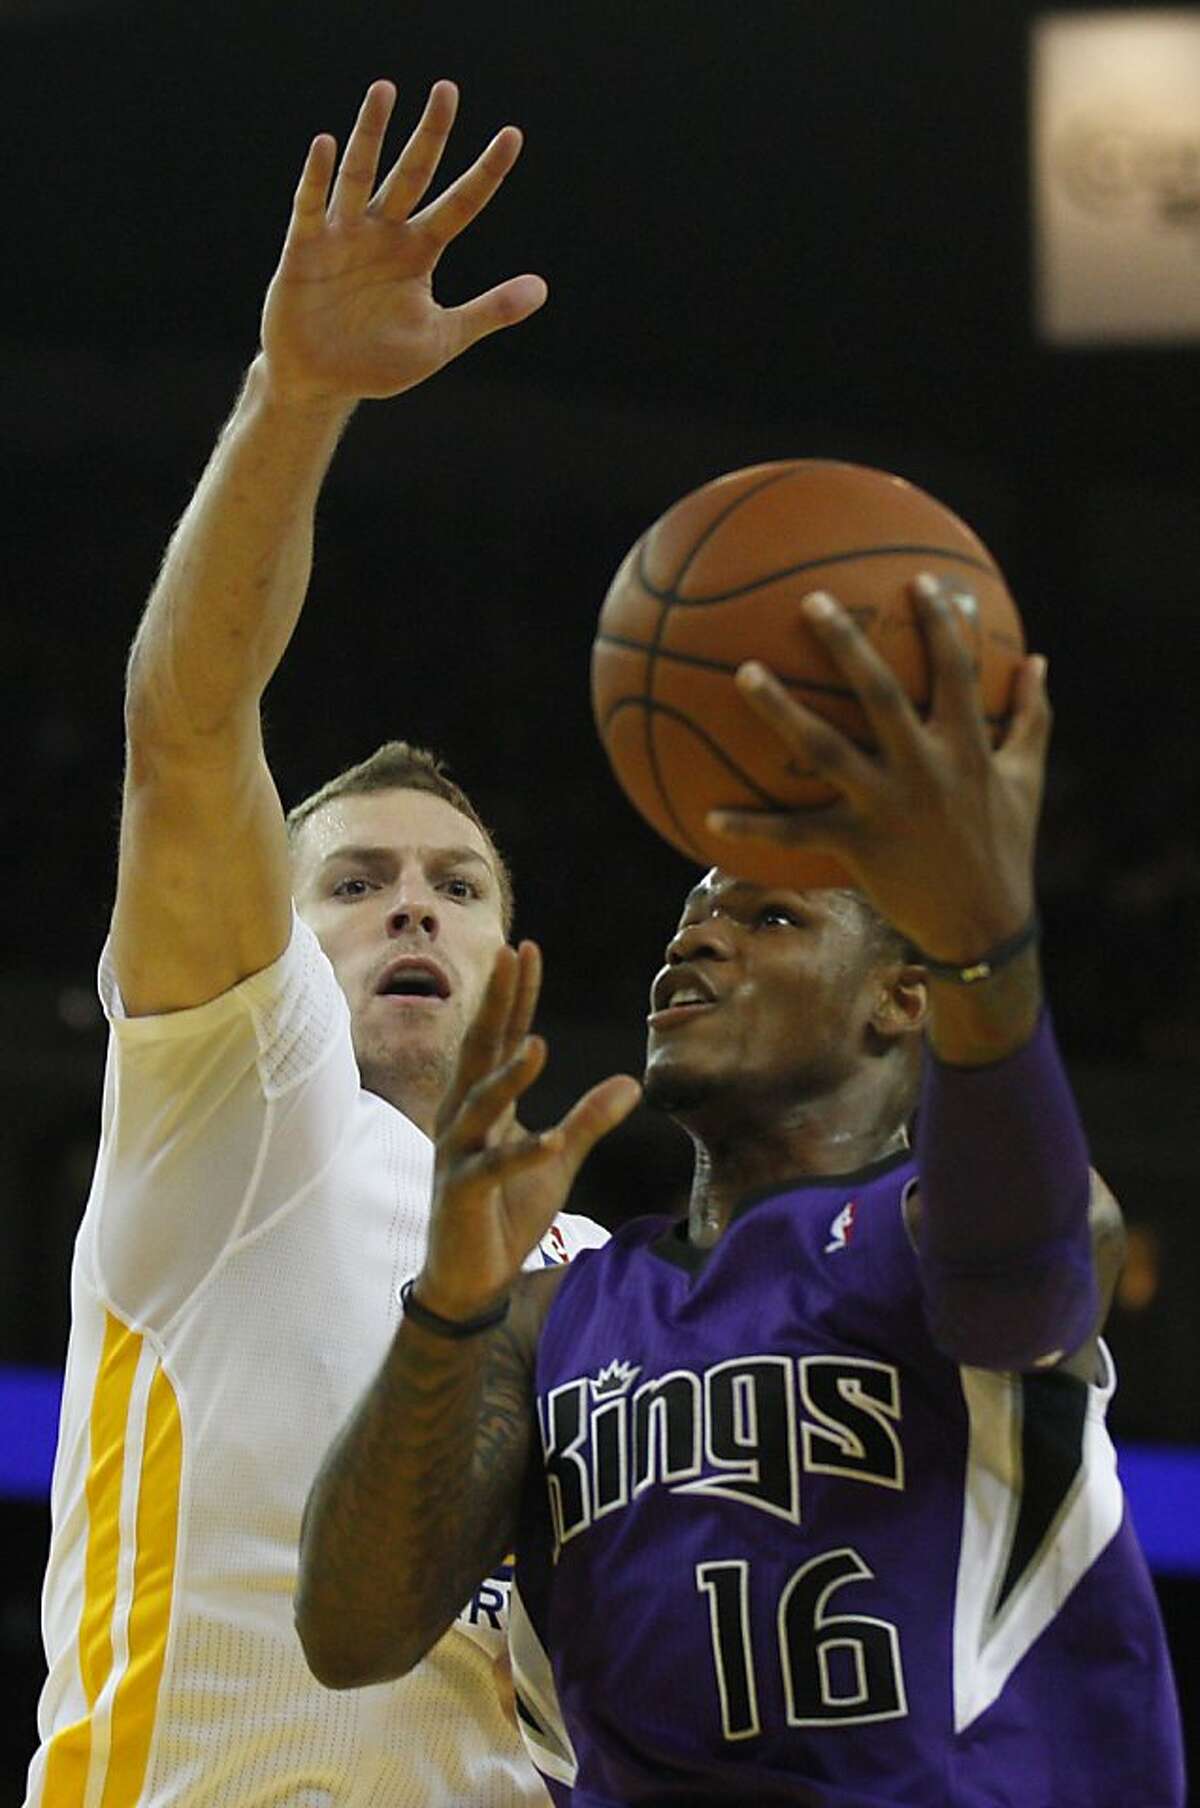 Warriors' David Lee, left, puts a block on Kings' Ben Mclemore November 2, 2013 during the Warriors vs. Kings game at the Oracle Arena in Oakland, Calif.